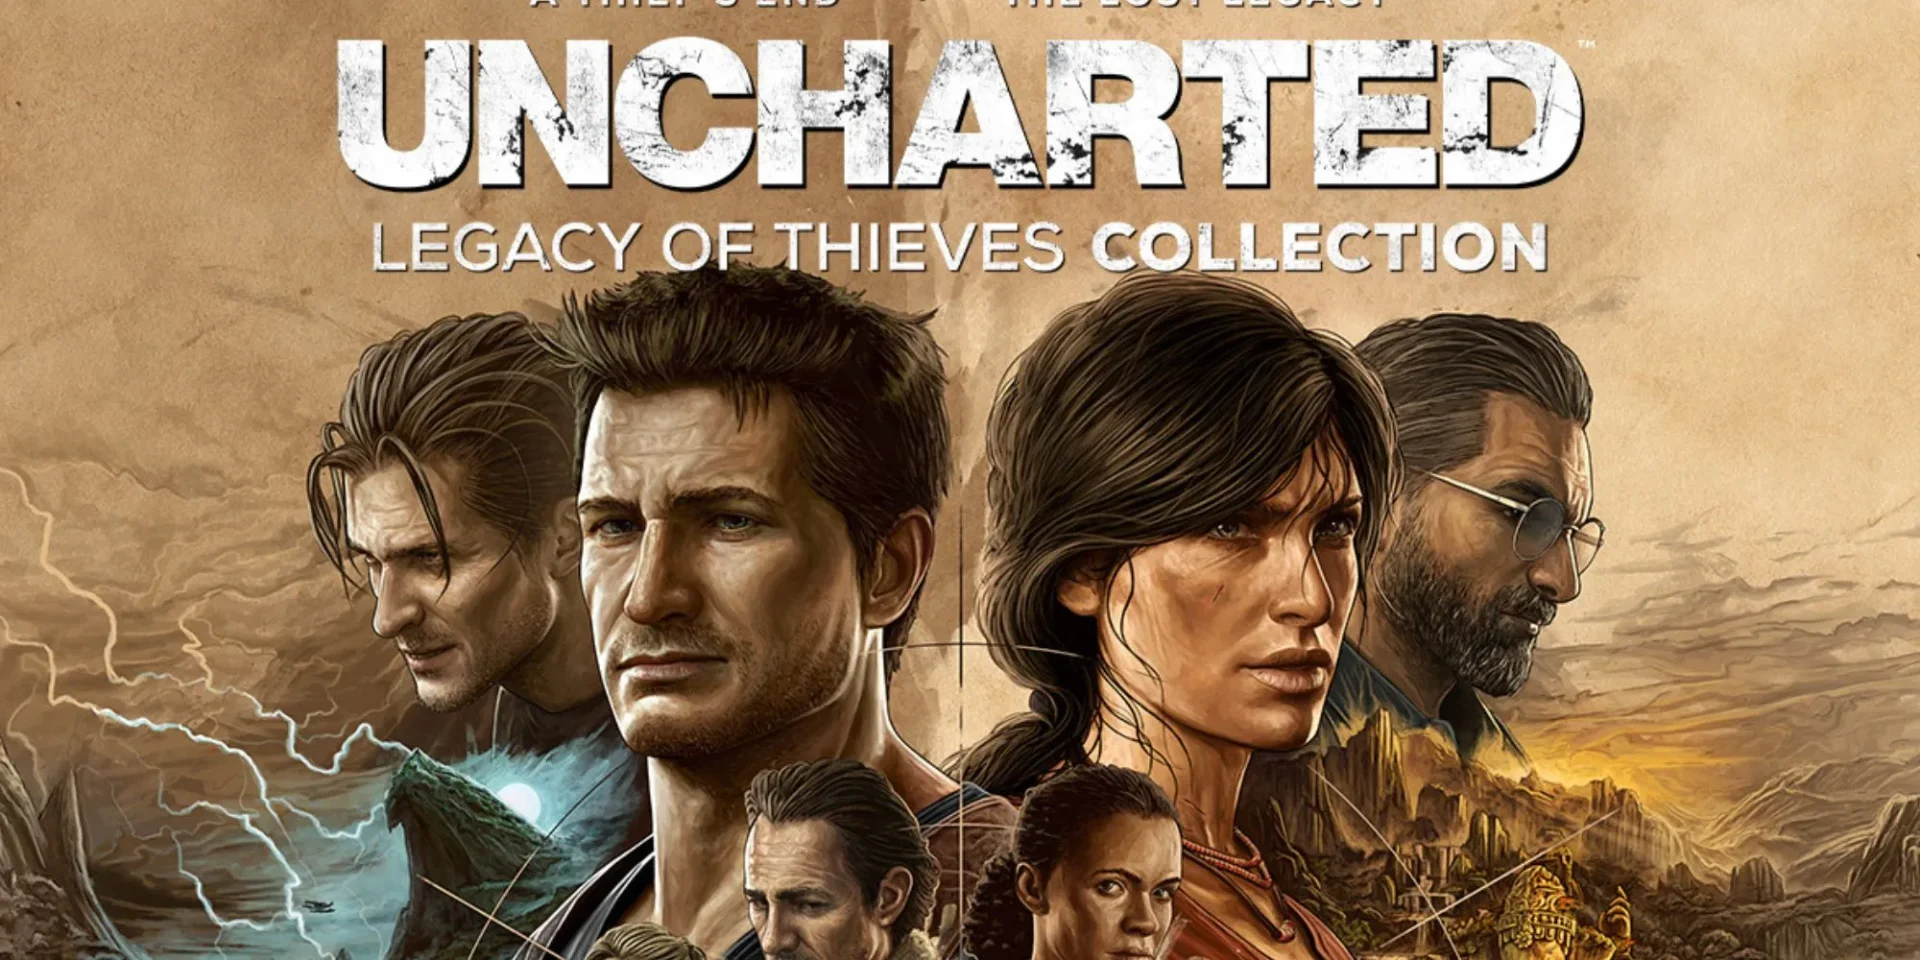 Uncharted thieves collection купить. Анчартед 5. Анчартед наследие воров. Uncharted 4 Legacy of Thieves. Игра Uncharted 5.